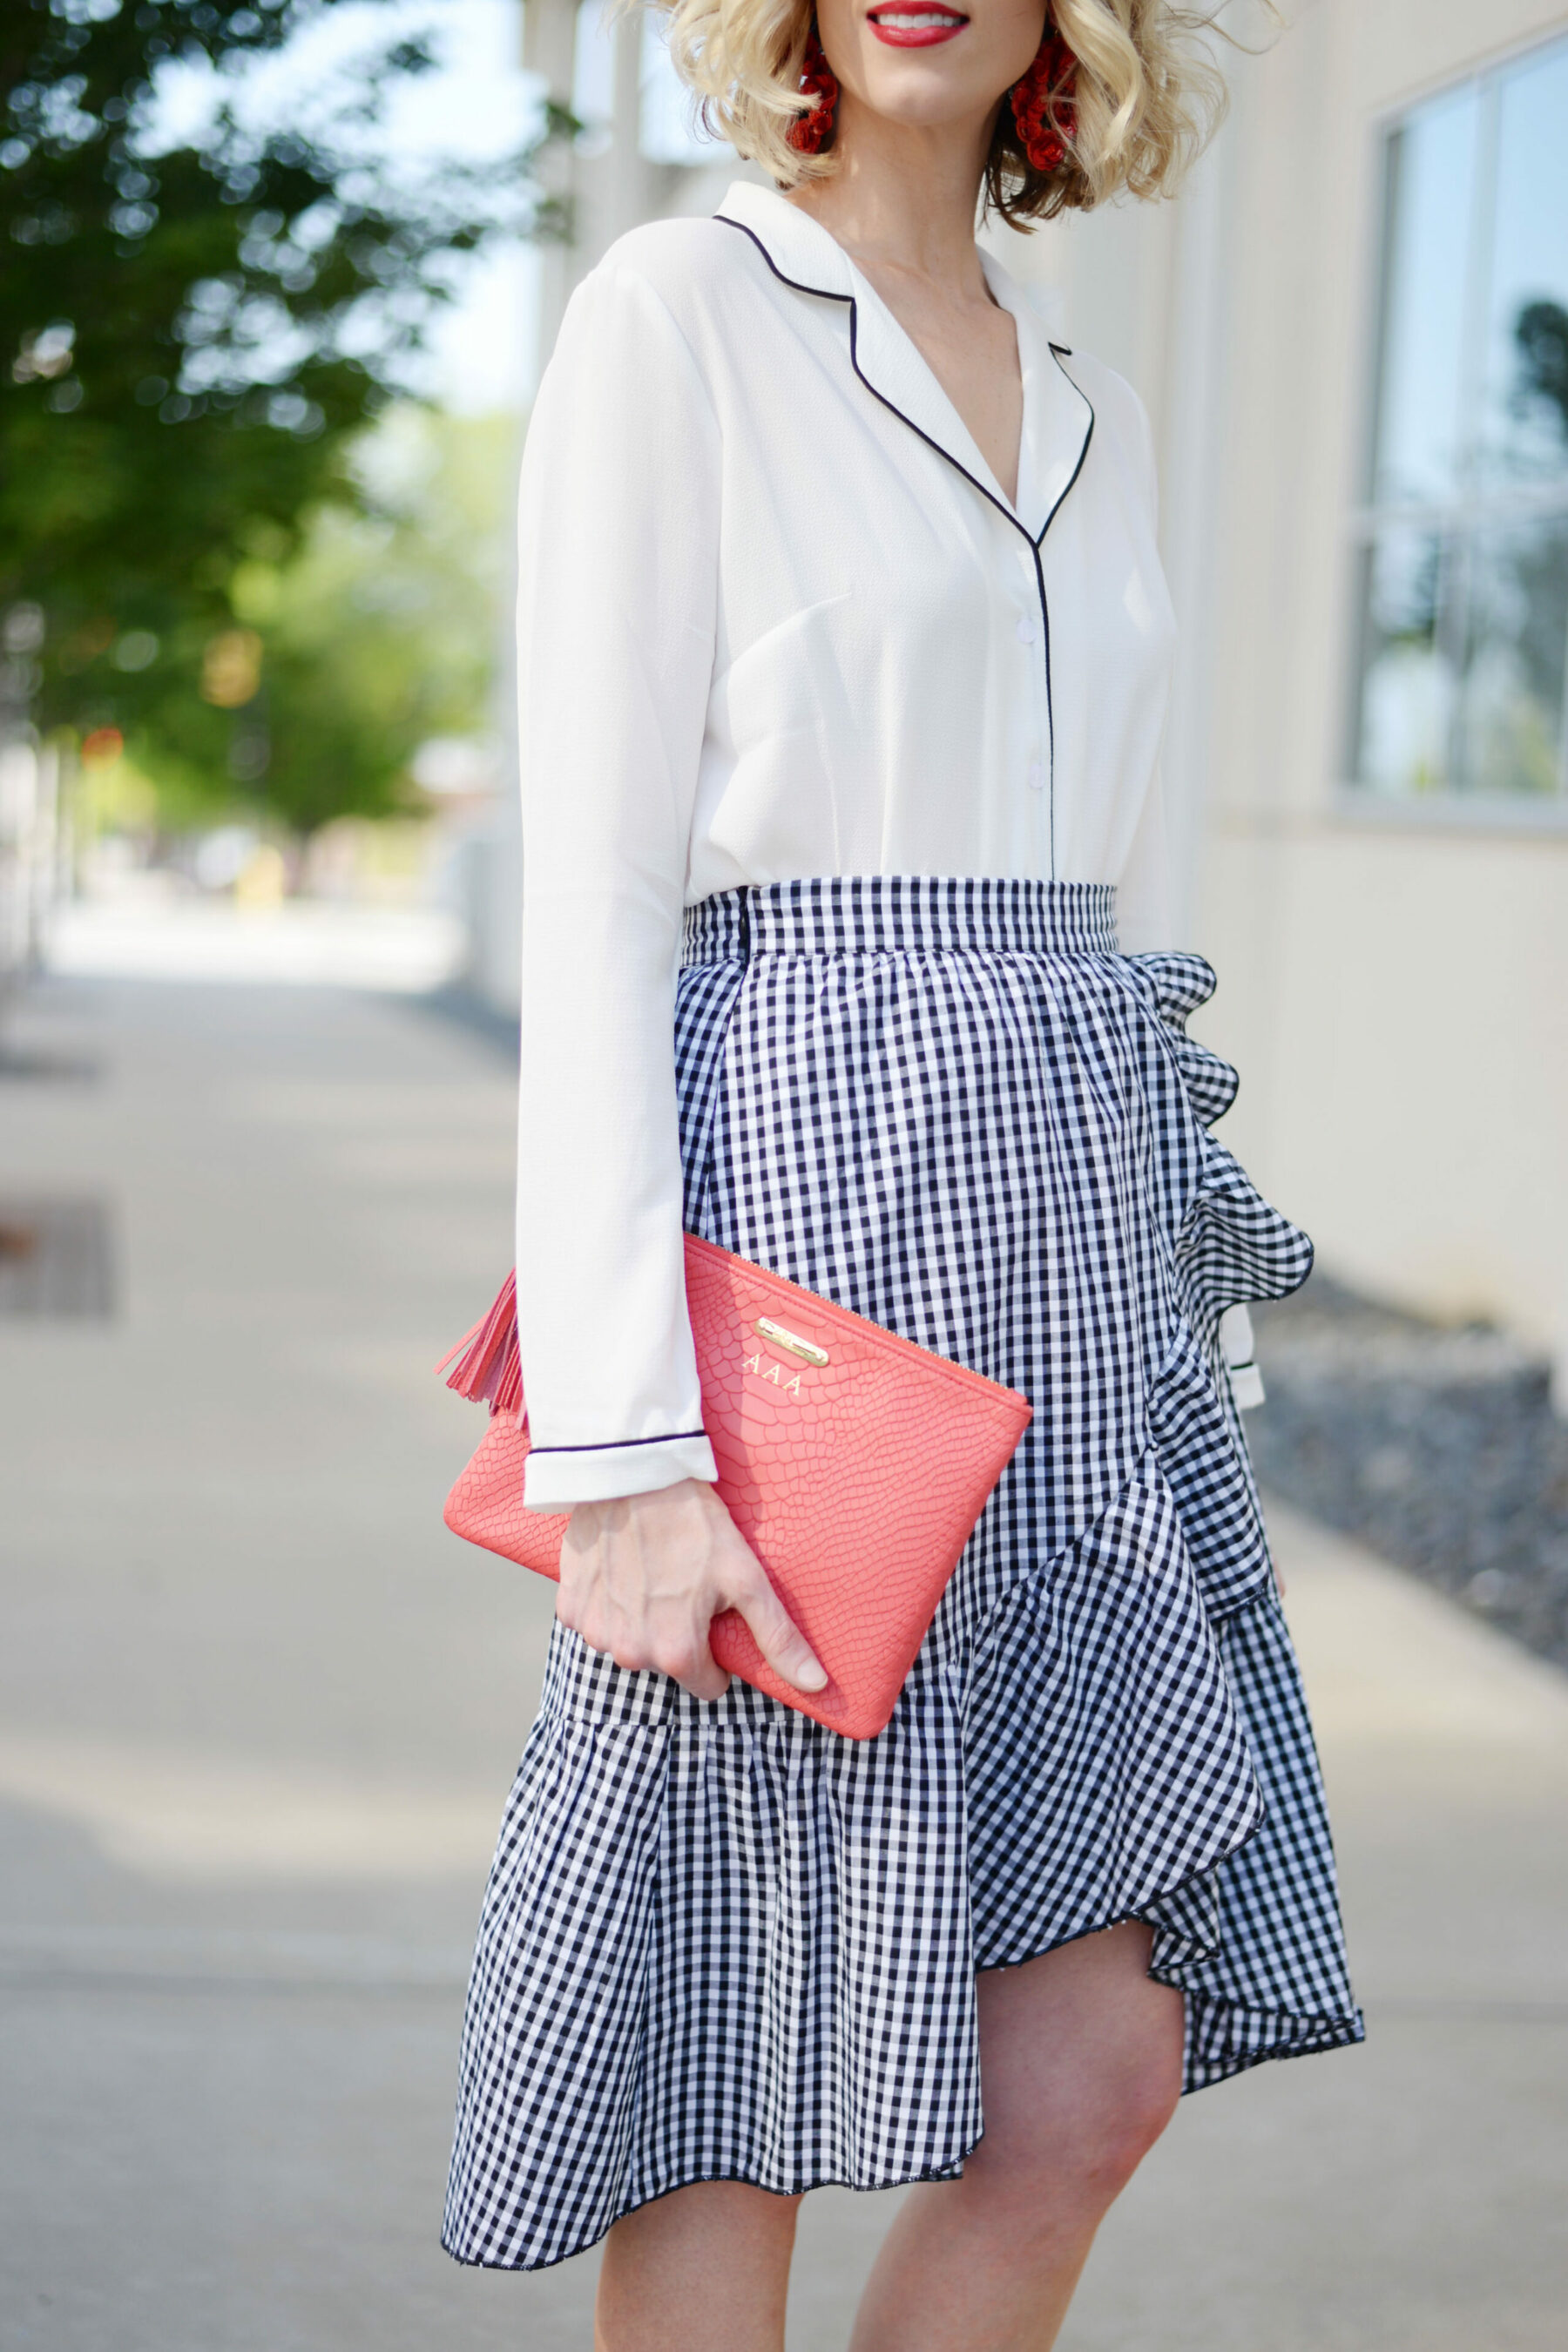 PJ top with gingham skirt details - Straight A Style